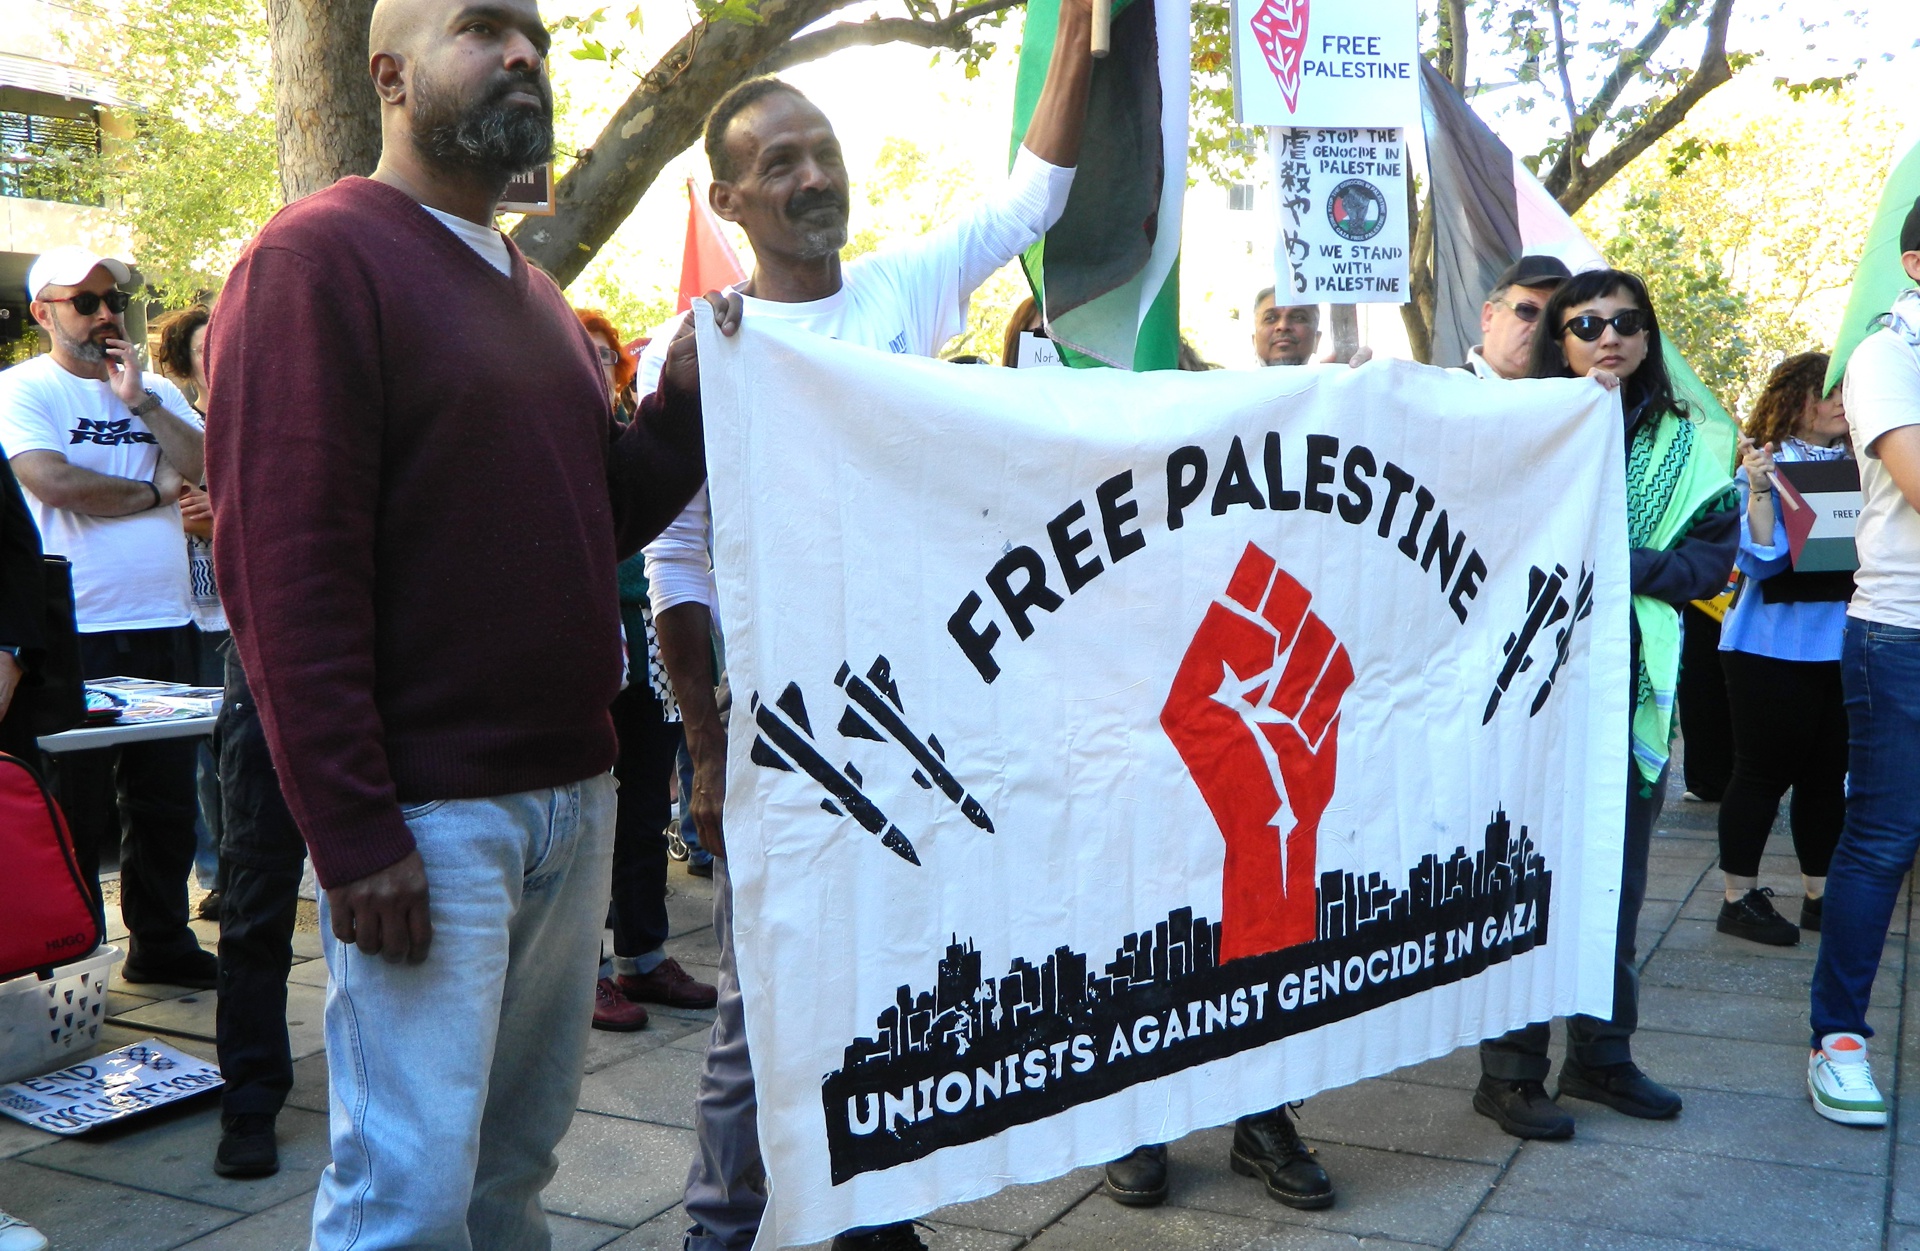 Unionists for a free Palestine, Kaurna Yerta/Adelaide, April 21